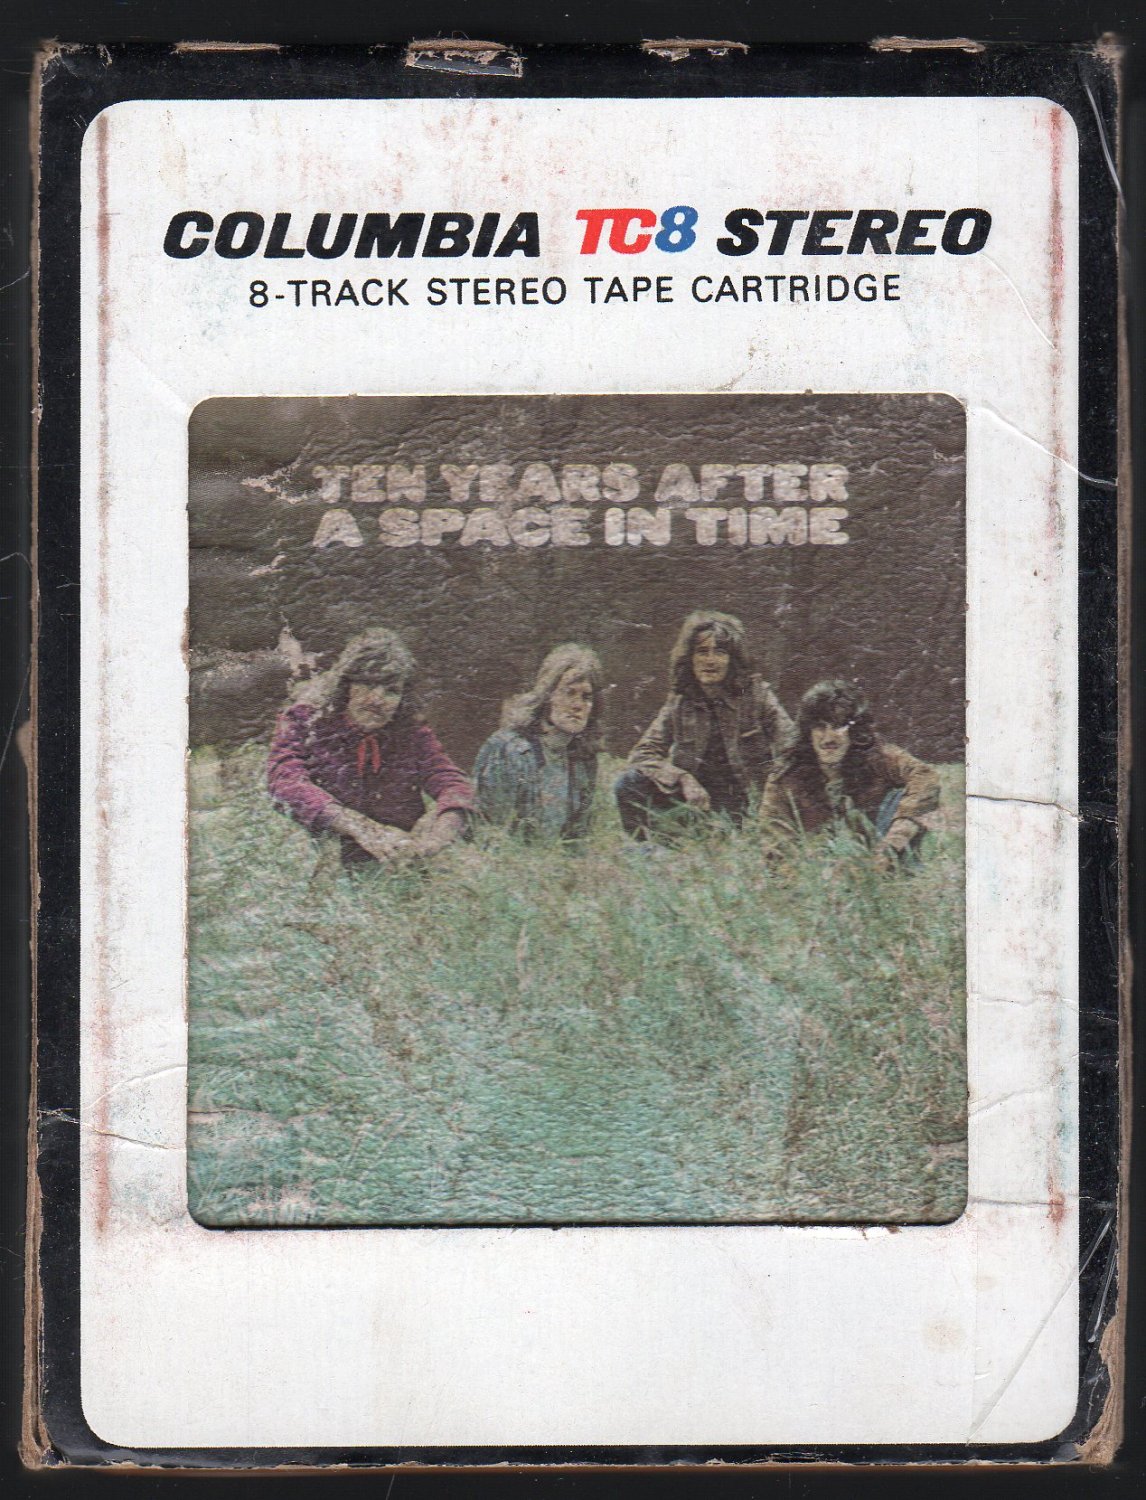 a space in time by ten years after